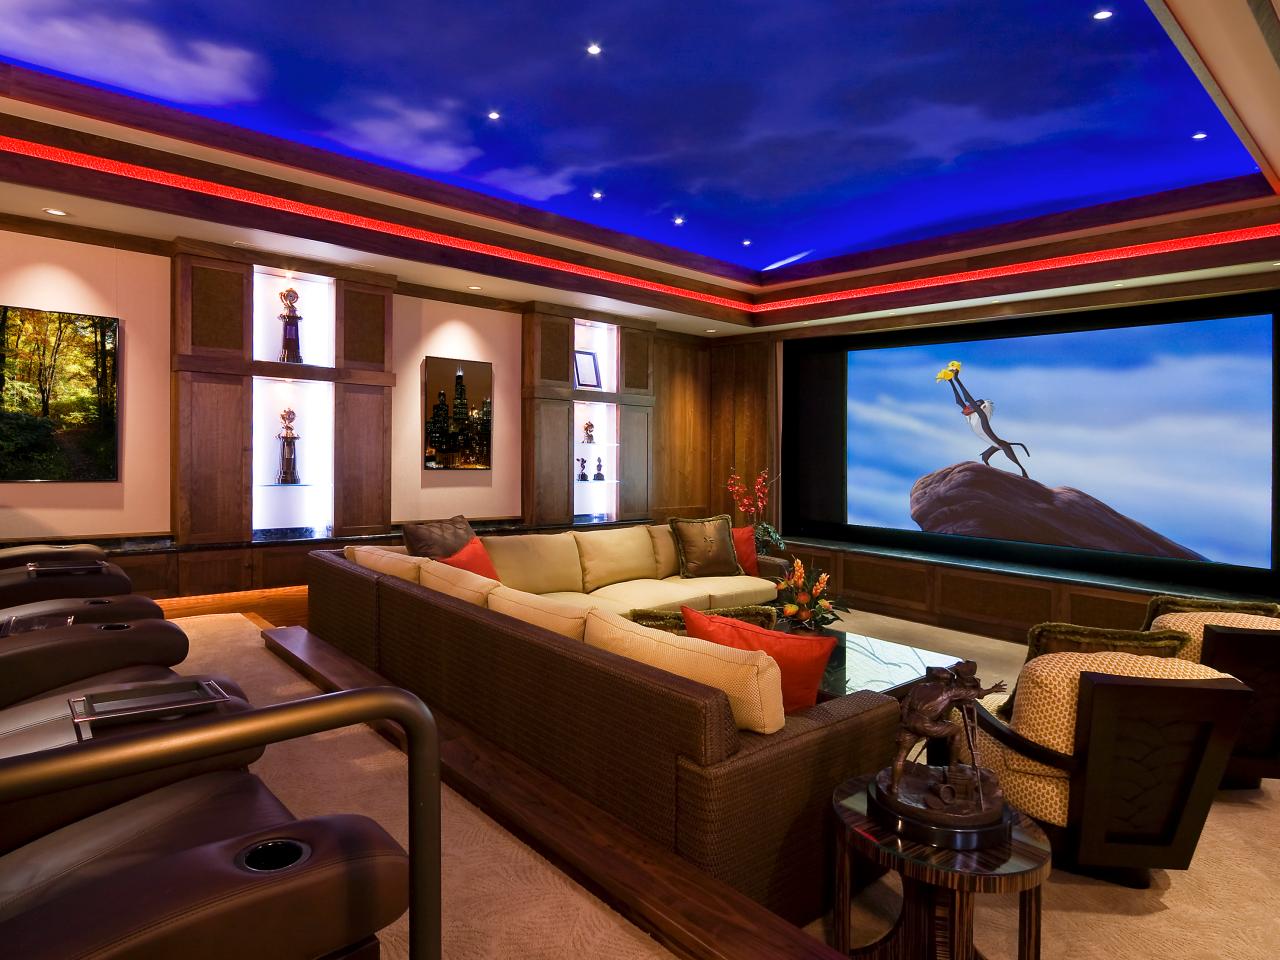 Choosing A Room For A Home Theater Hgtv